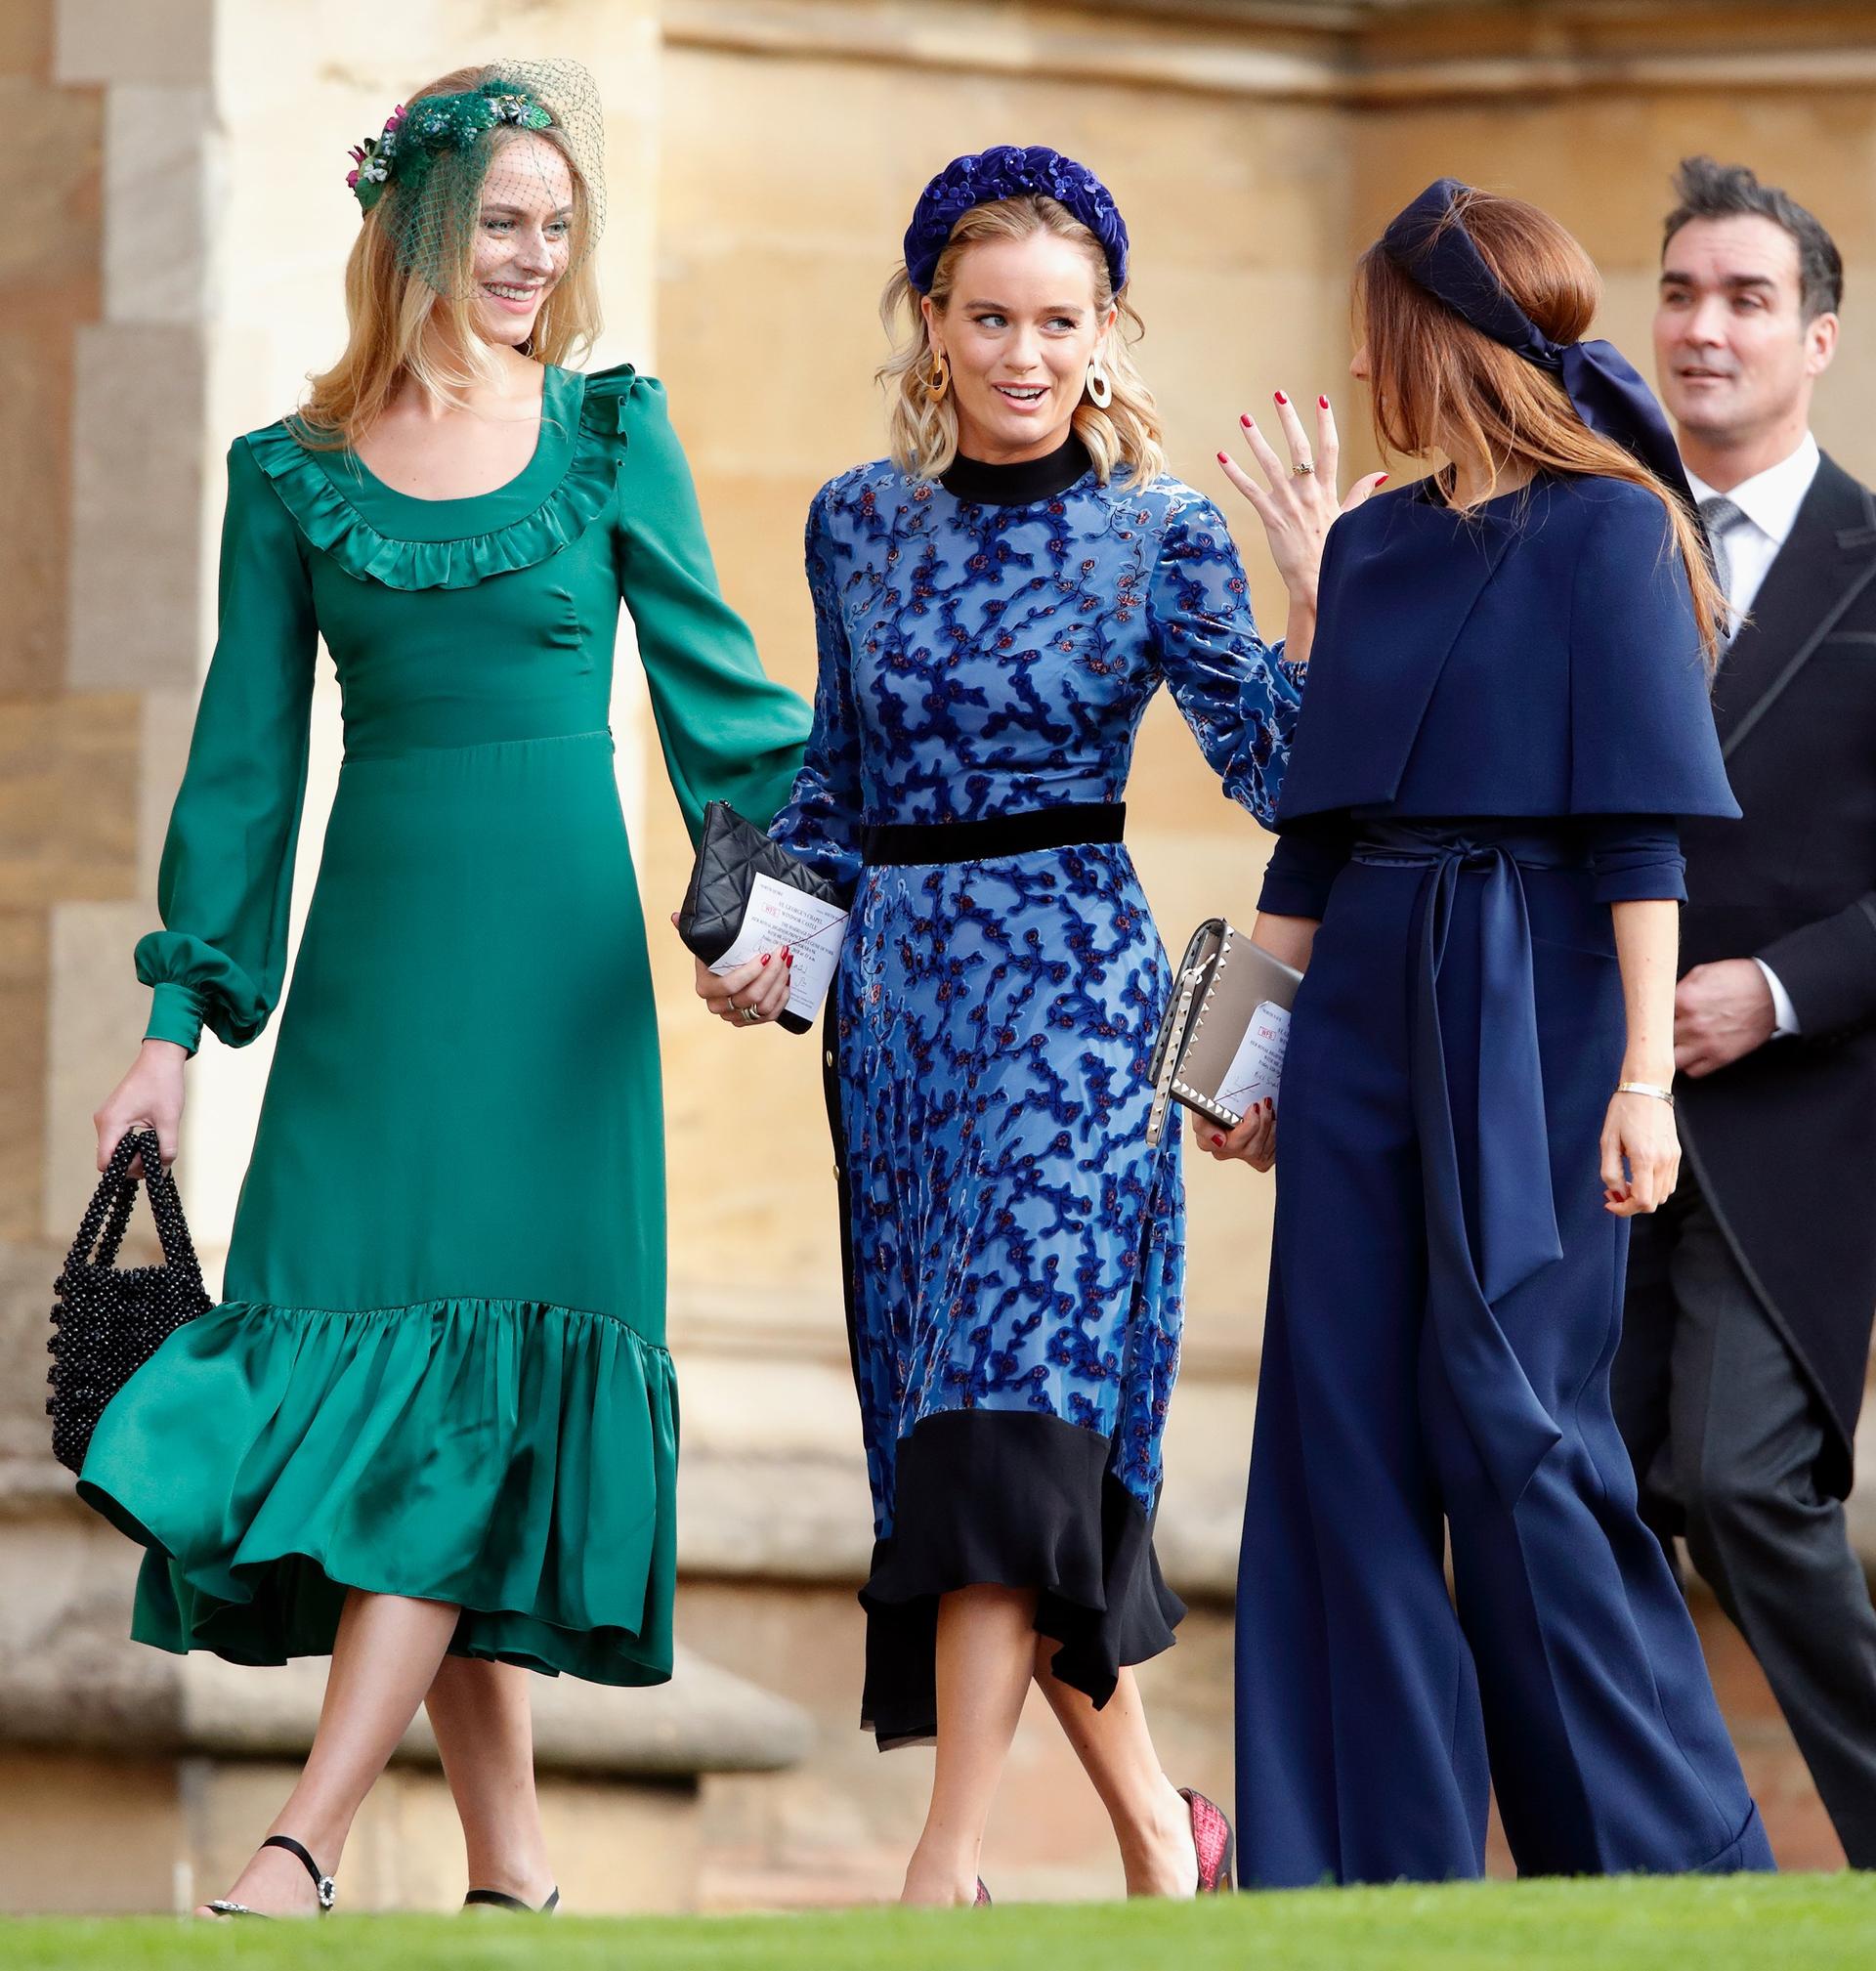 Celebrity Wedding Guests: The 30 Best Looks - hitched.co.uk - hitched.co.uk